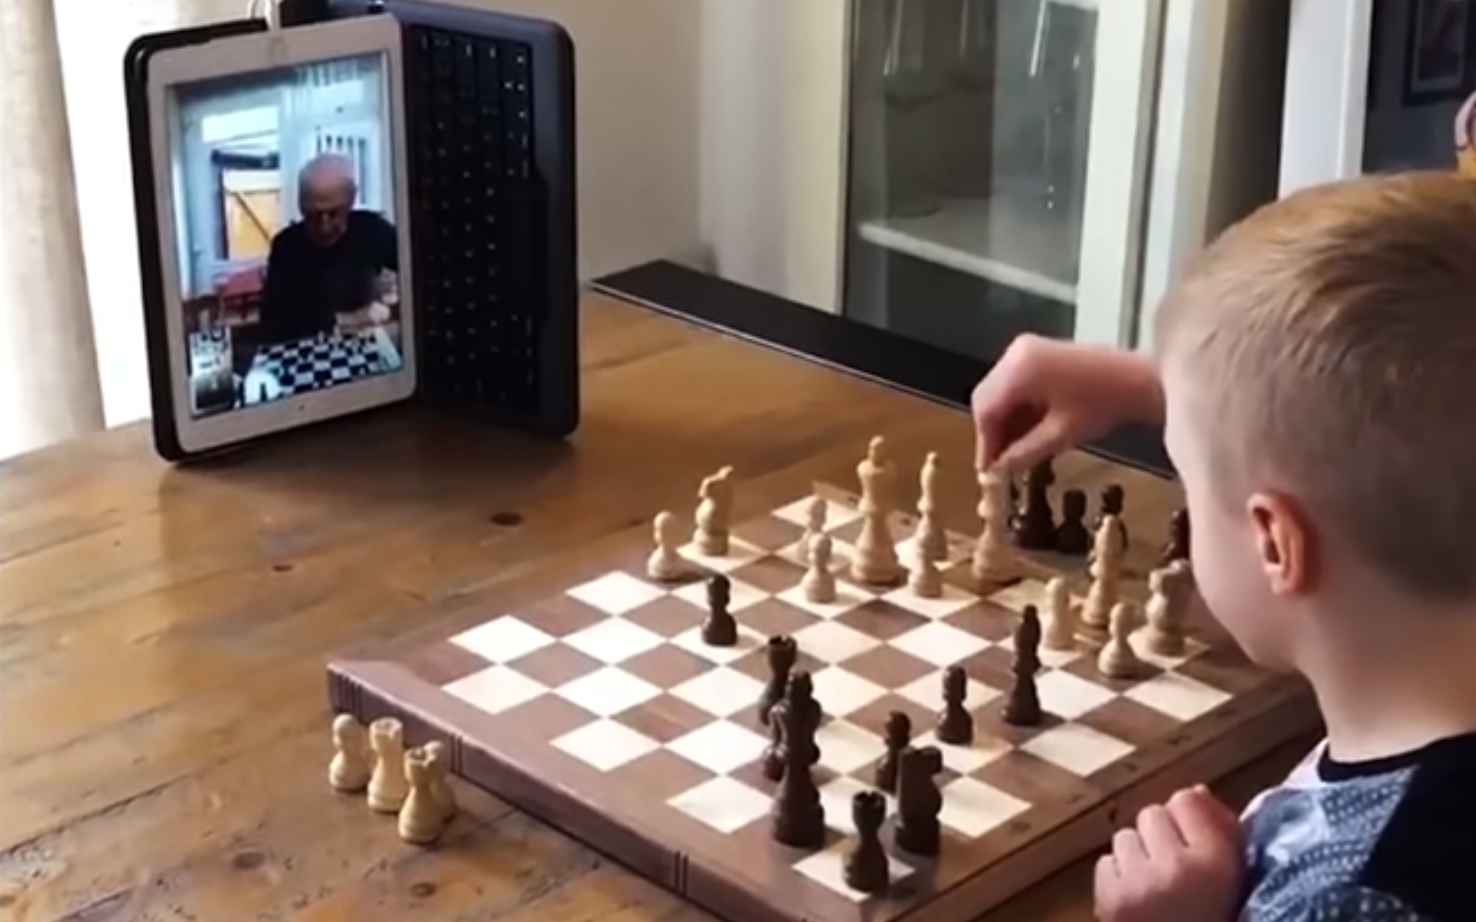 A young boy plays chess with his grandparent via video call on a tablet